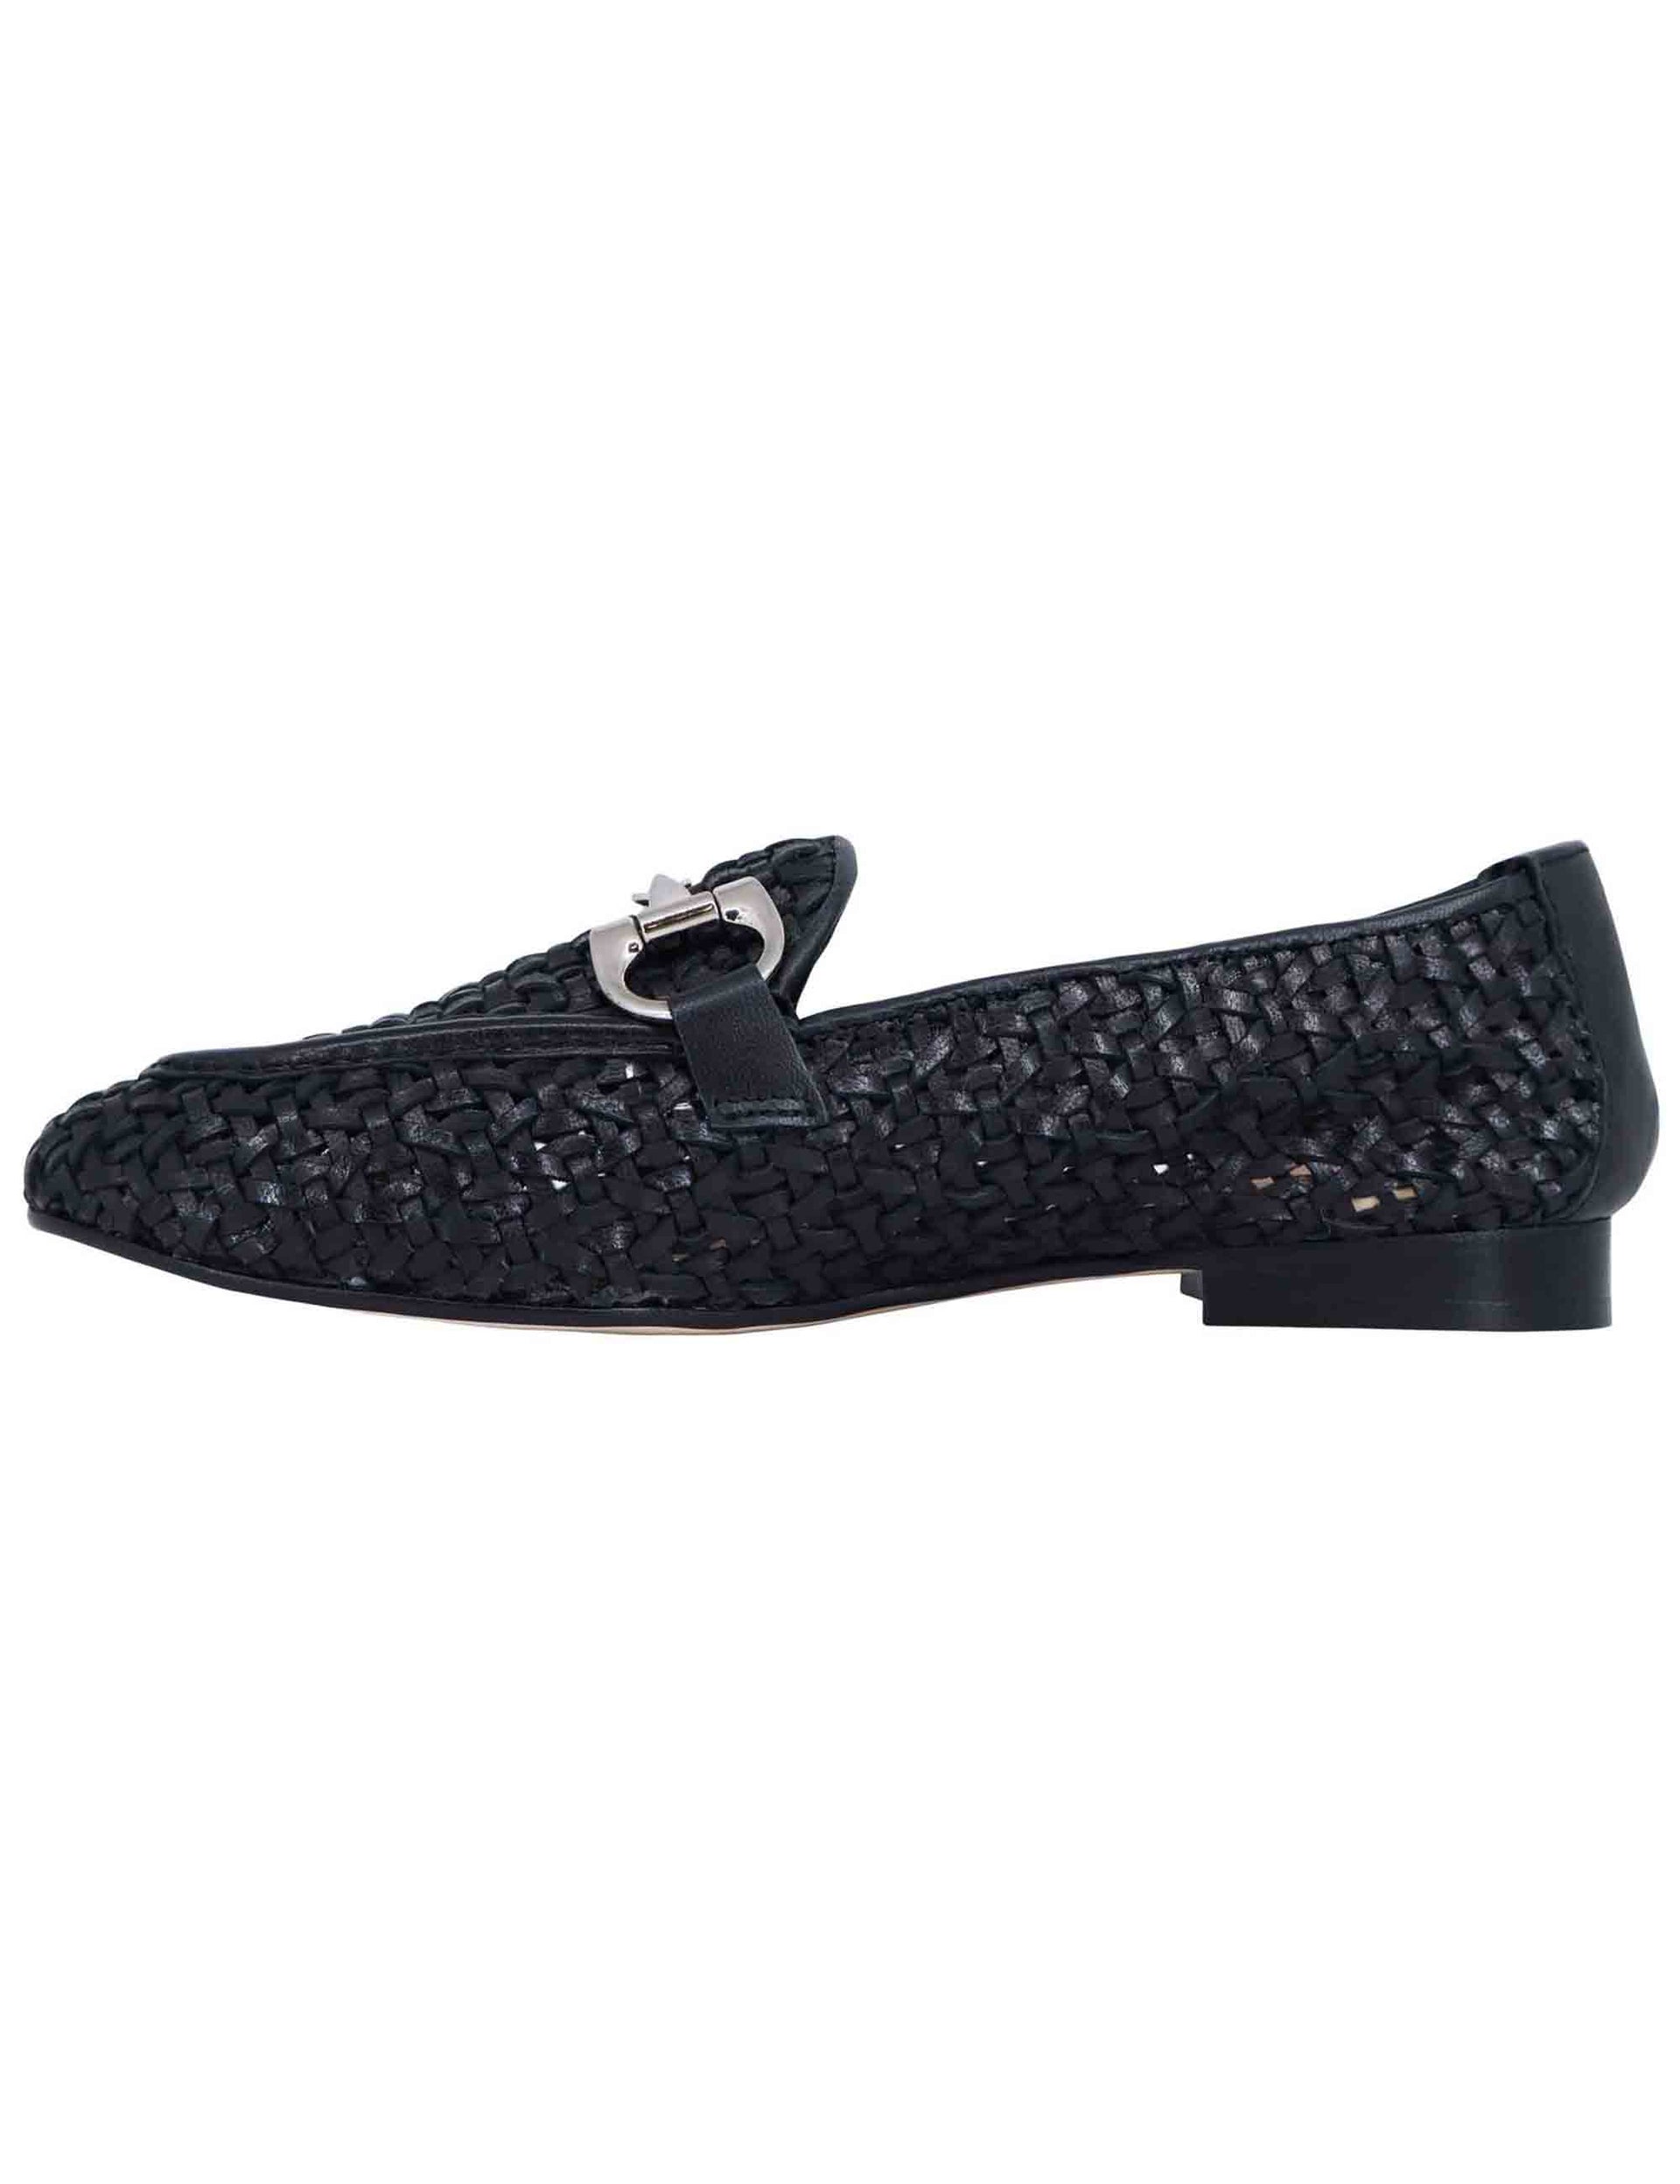 Women's loafers in black woven and perforated leather with silver clamp